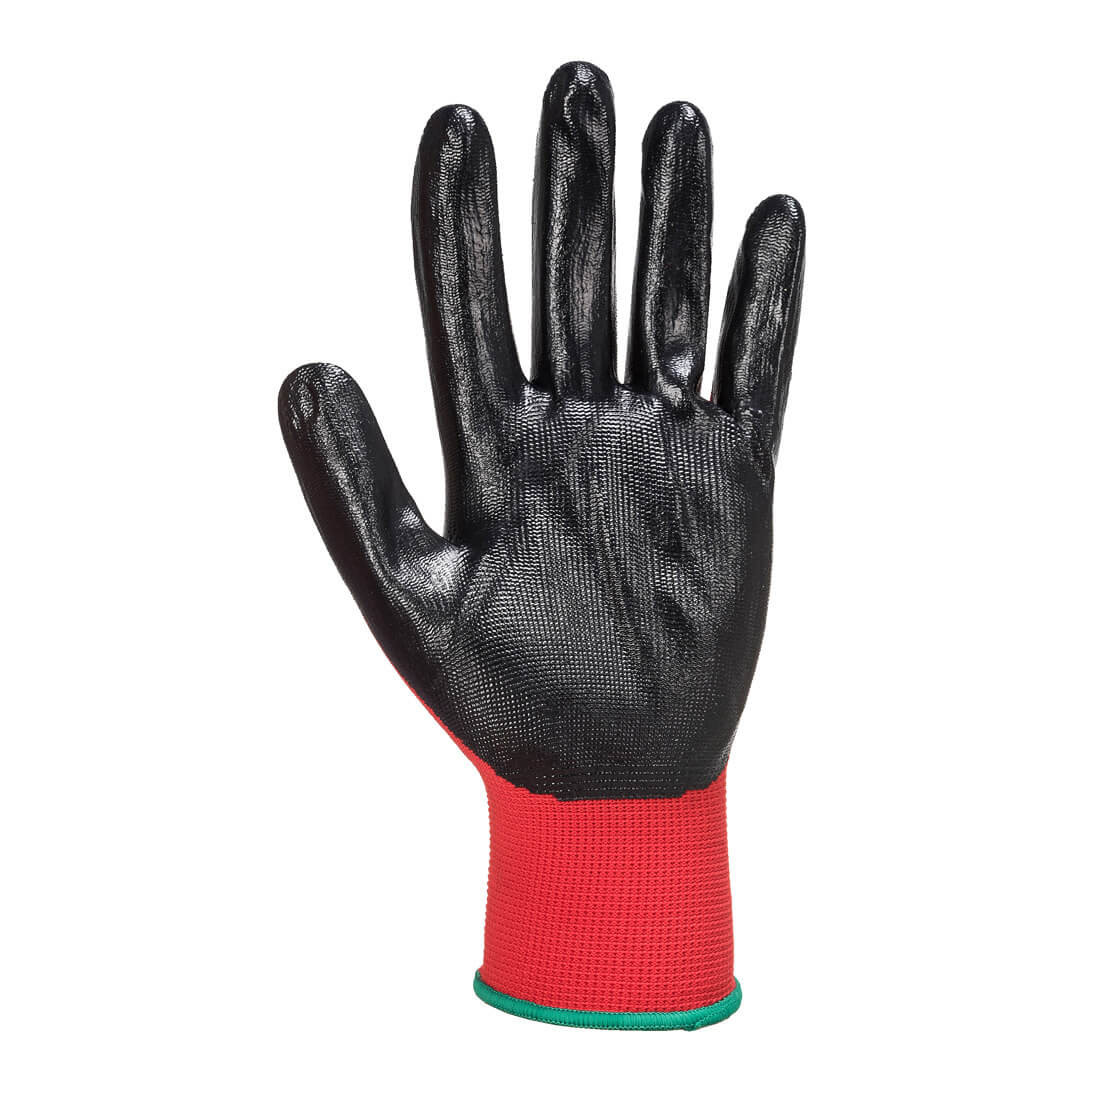 Flexo Grip Nitrile Glove (with merchandise bag) - Personal protection